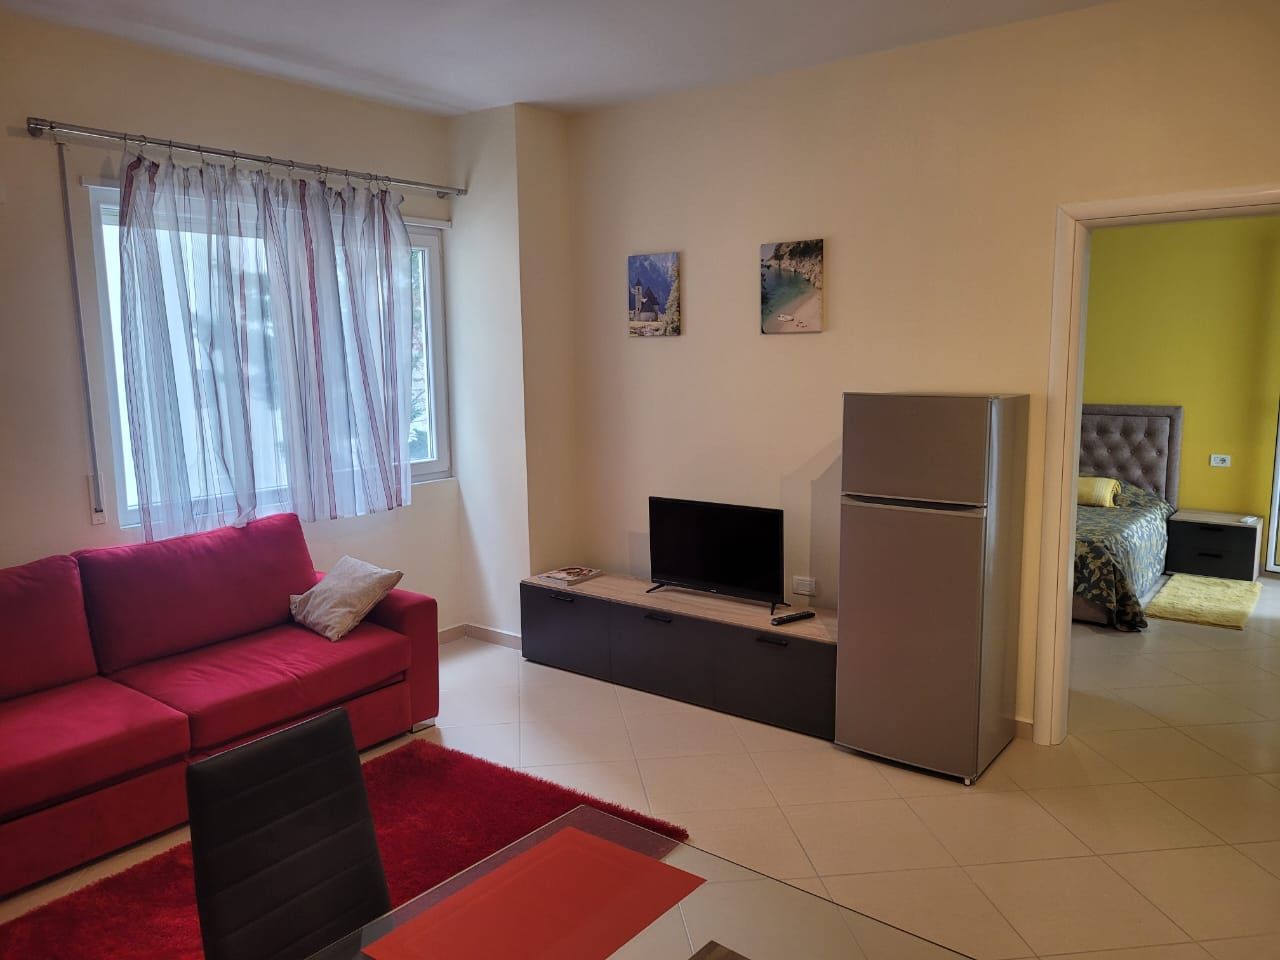 Holiday Apartment With One Bedroom For Rent In Shkembi Kavajes Durres Albania 